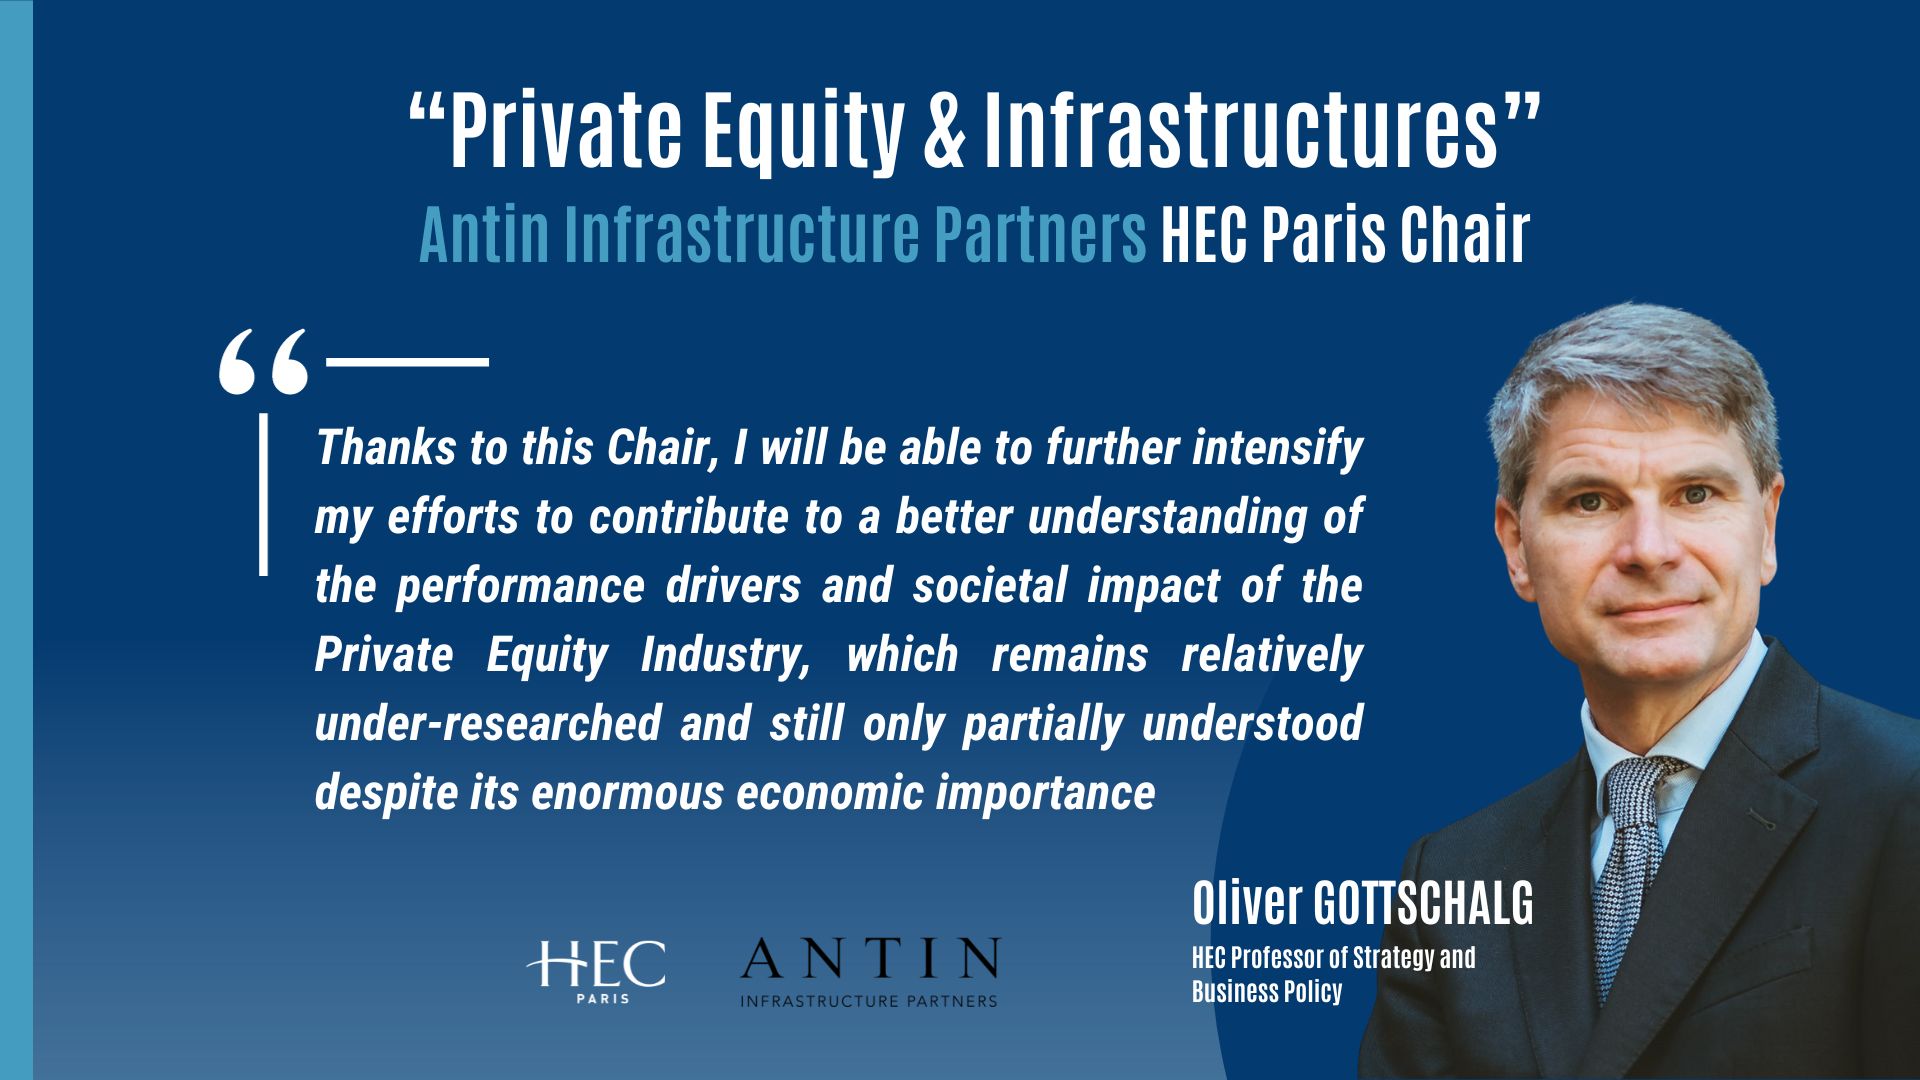 HEC Prof. Oliver Gottschalg quote about HEC Paris Antin Infrastructure Partners' Chair